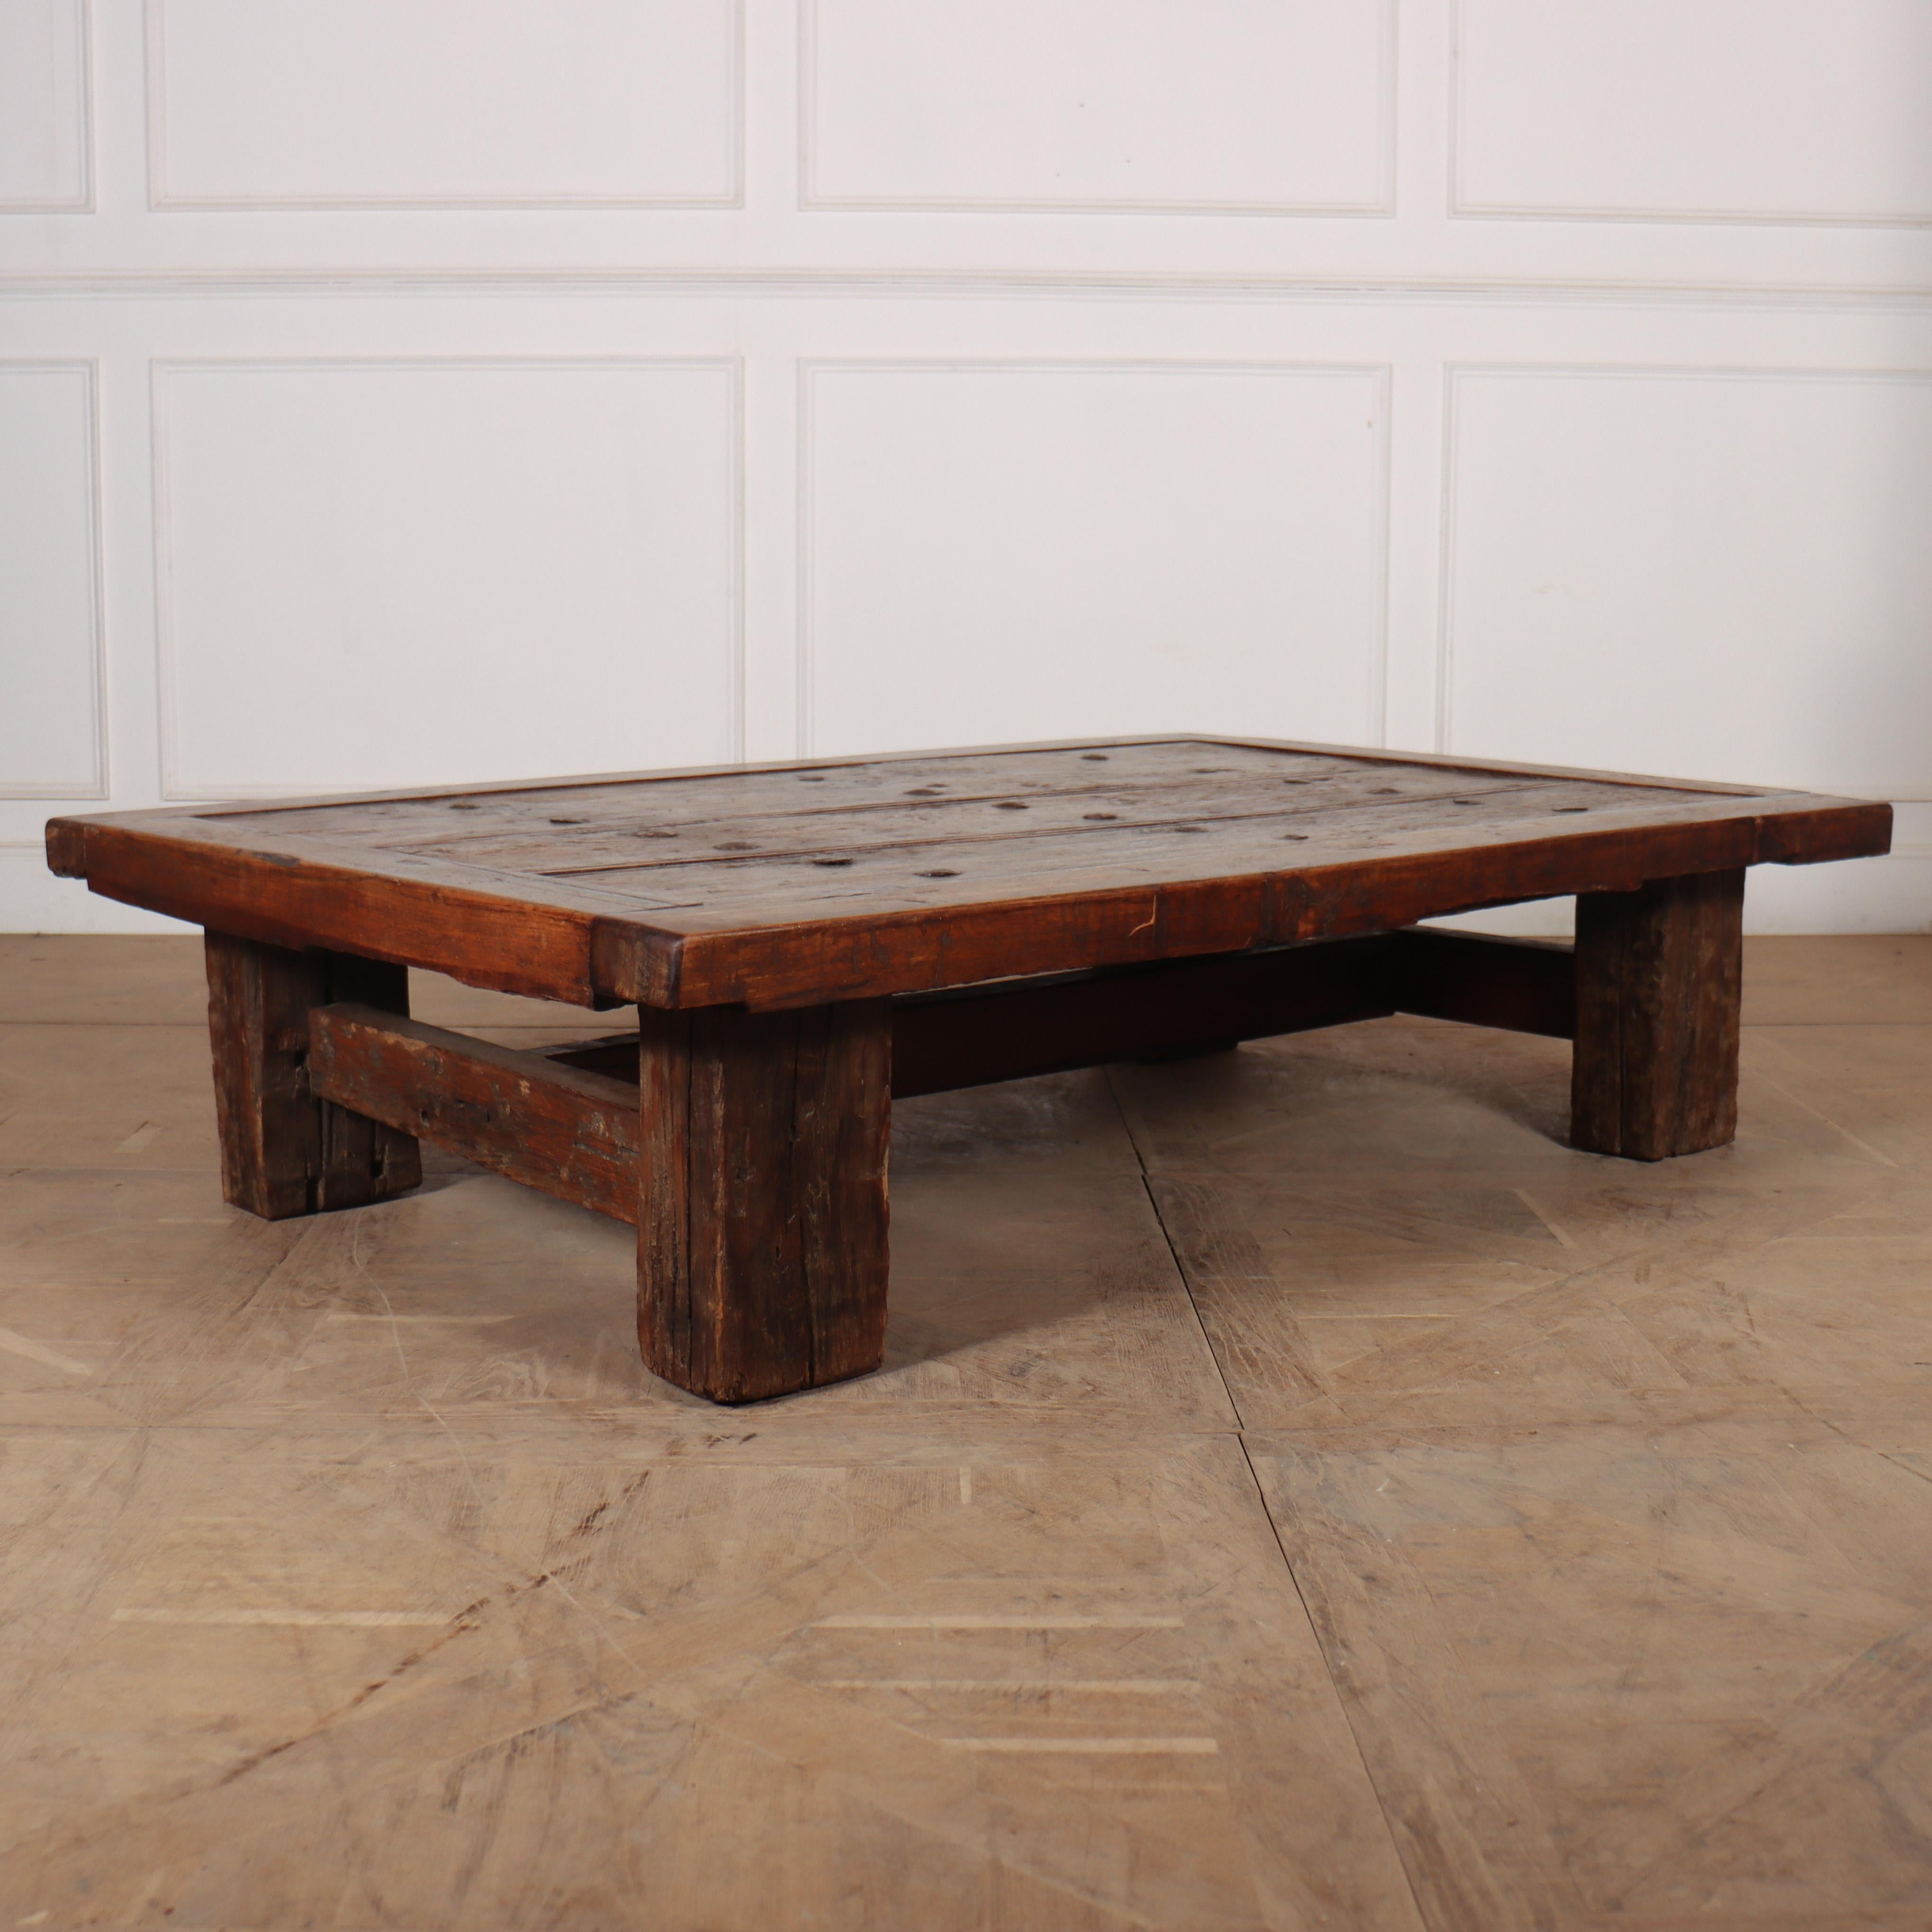 19th C studded teak and walnut door converted into a large coffee table. 1880.

2.5